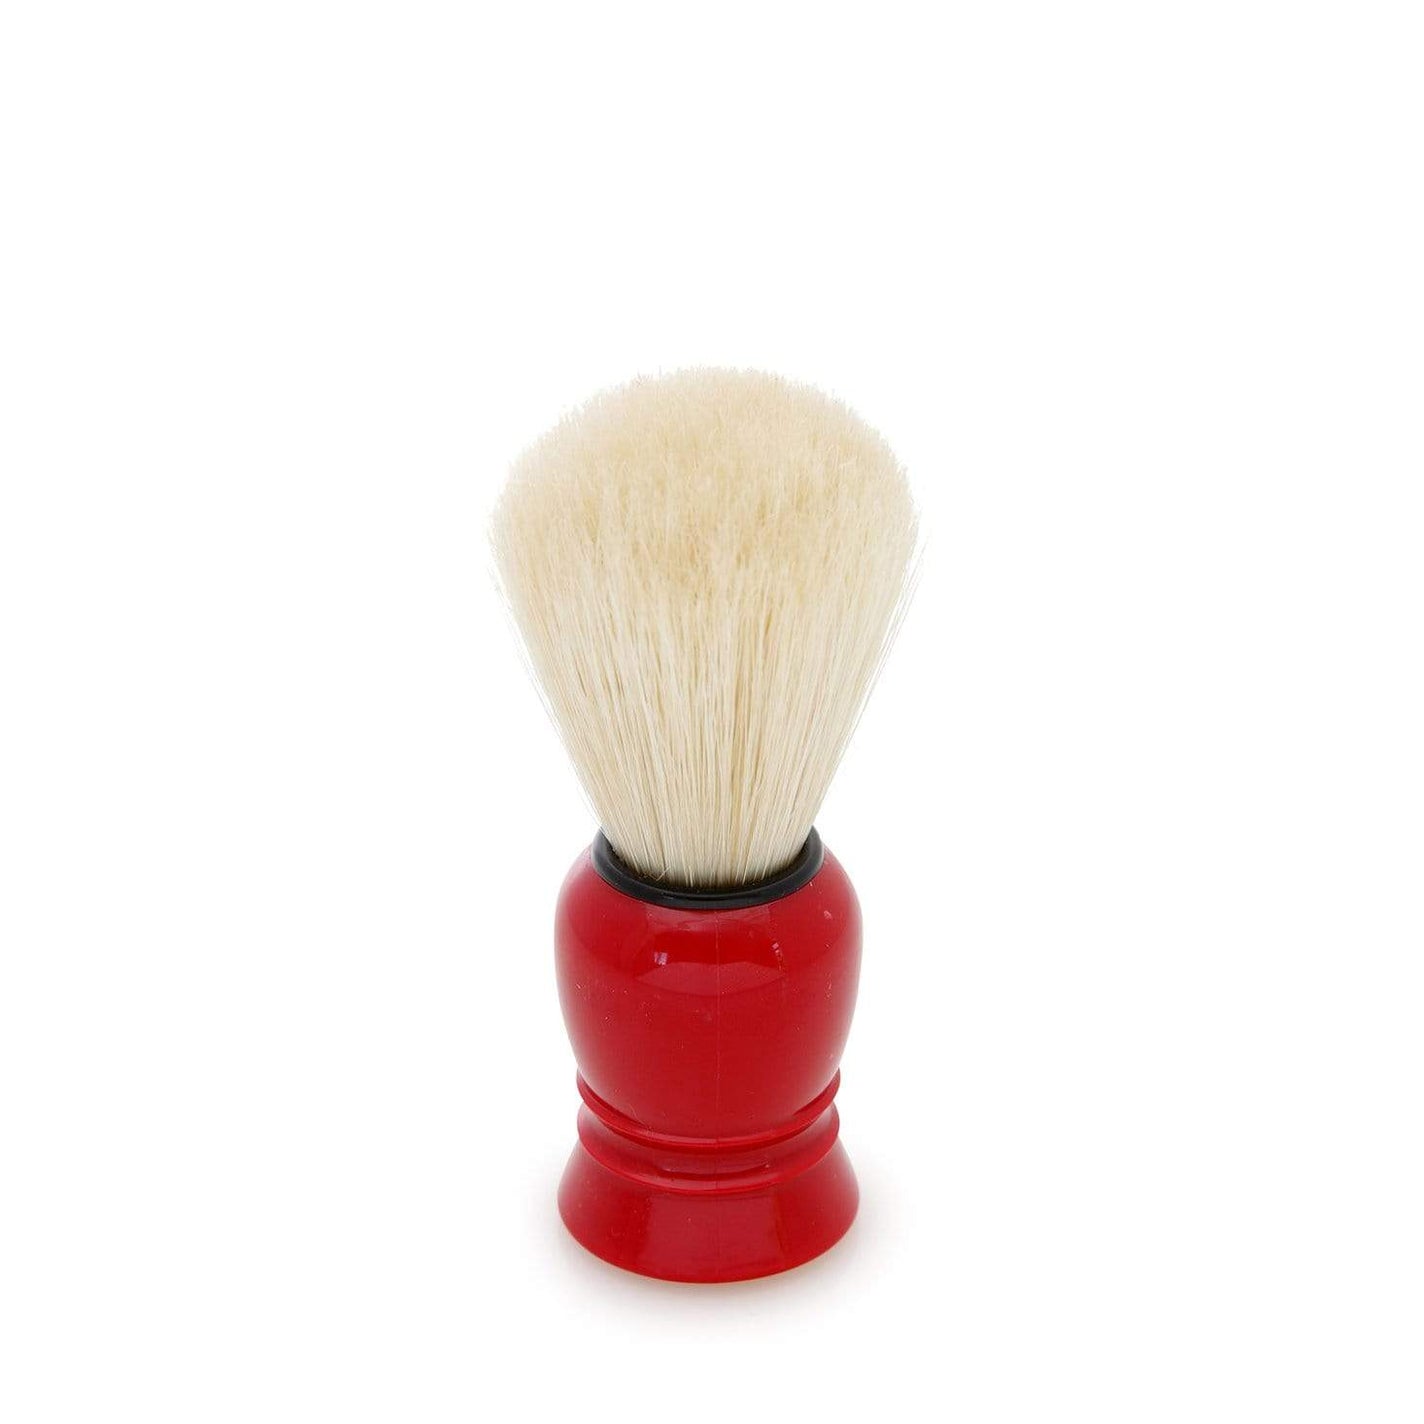 Acca Kappa Red Lacquered Shave Brush